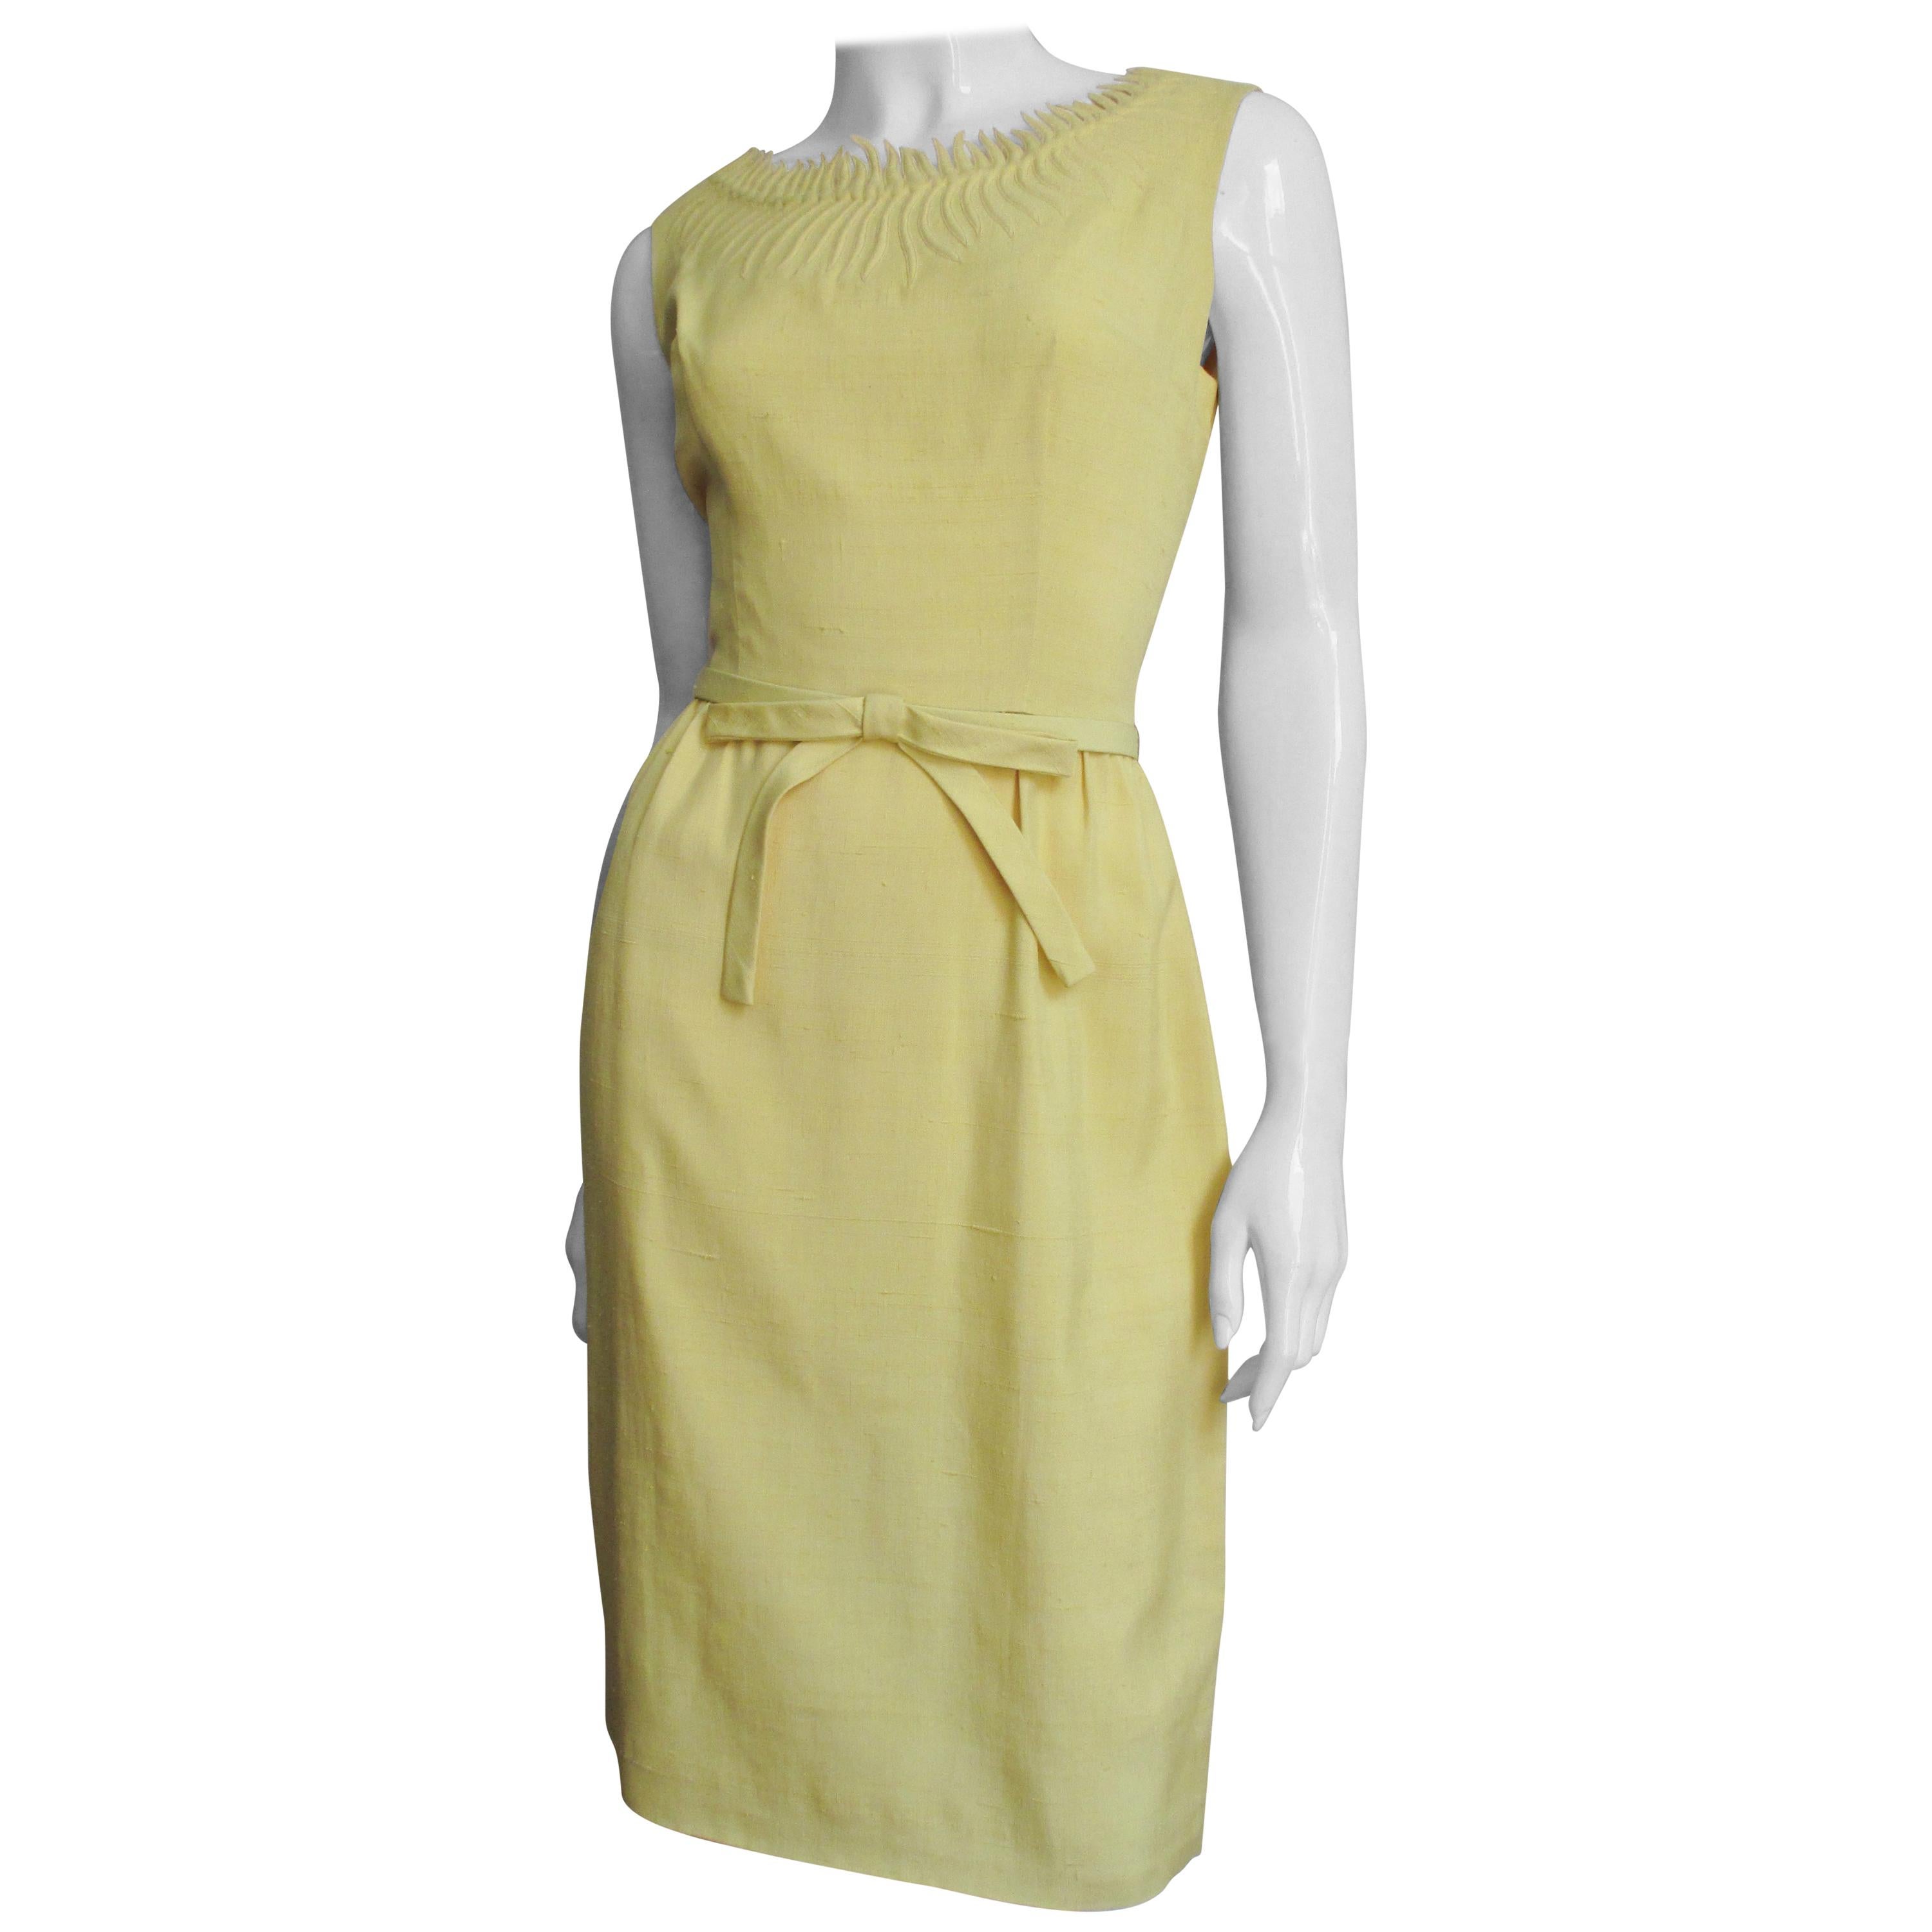 A beautiful yellow linen dress and off white cashmere cardigan sweater set. The sleeveless semi fitted dress has amazing detailed embroidery and cut work in the form of rays emanating from around the neckline. This intricate work is repeated around